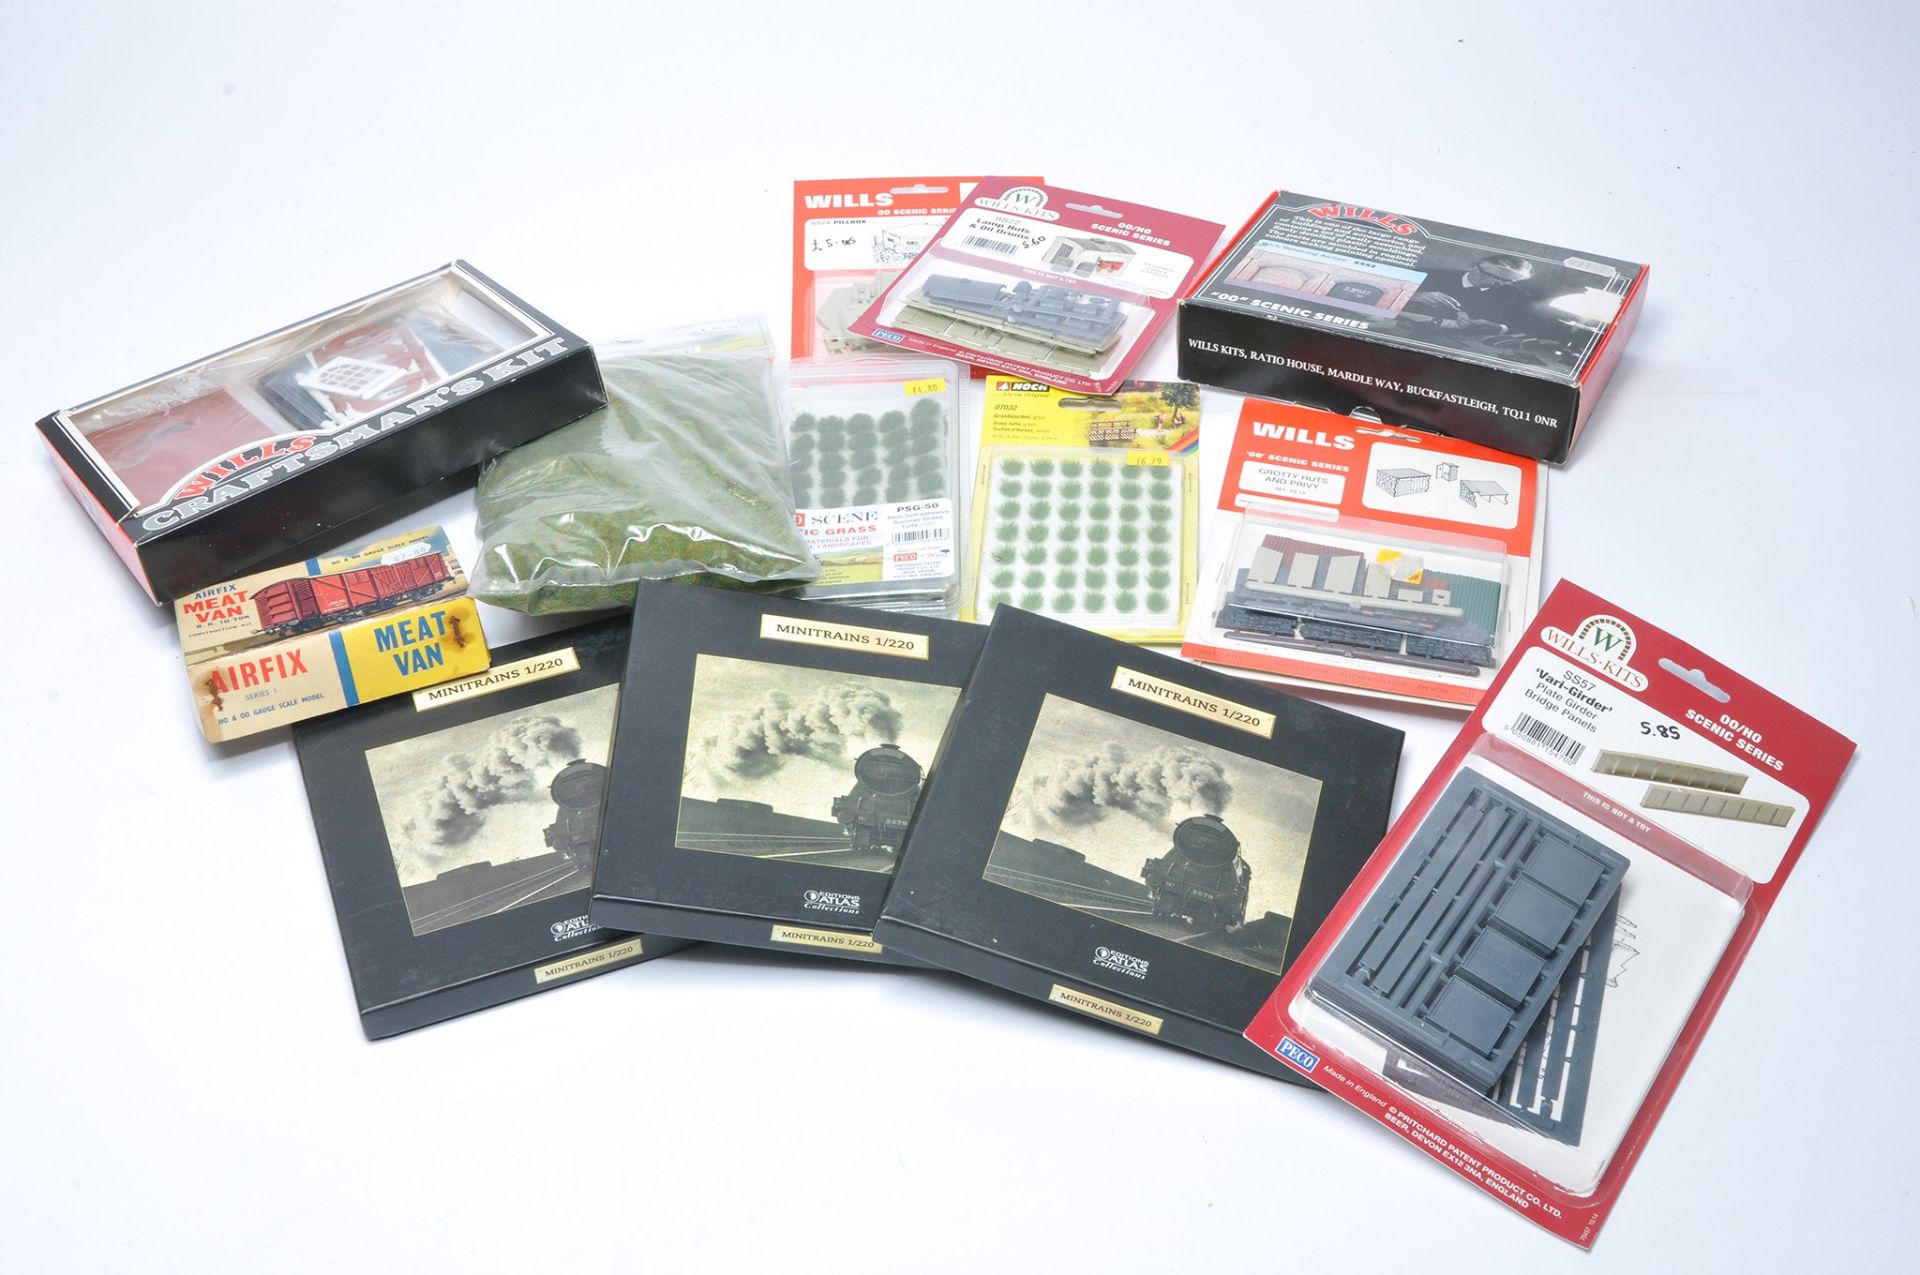 A quantity of model railway kits and accessory / layout items including Wills, Airfix and others